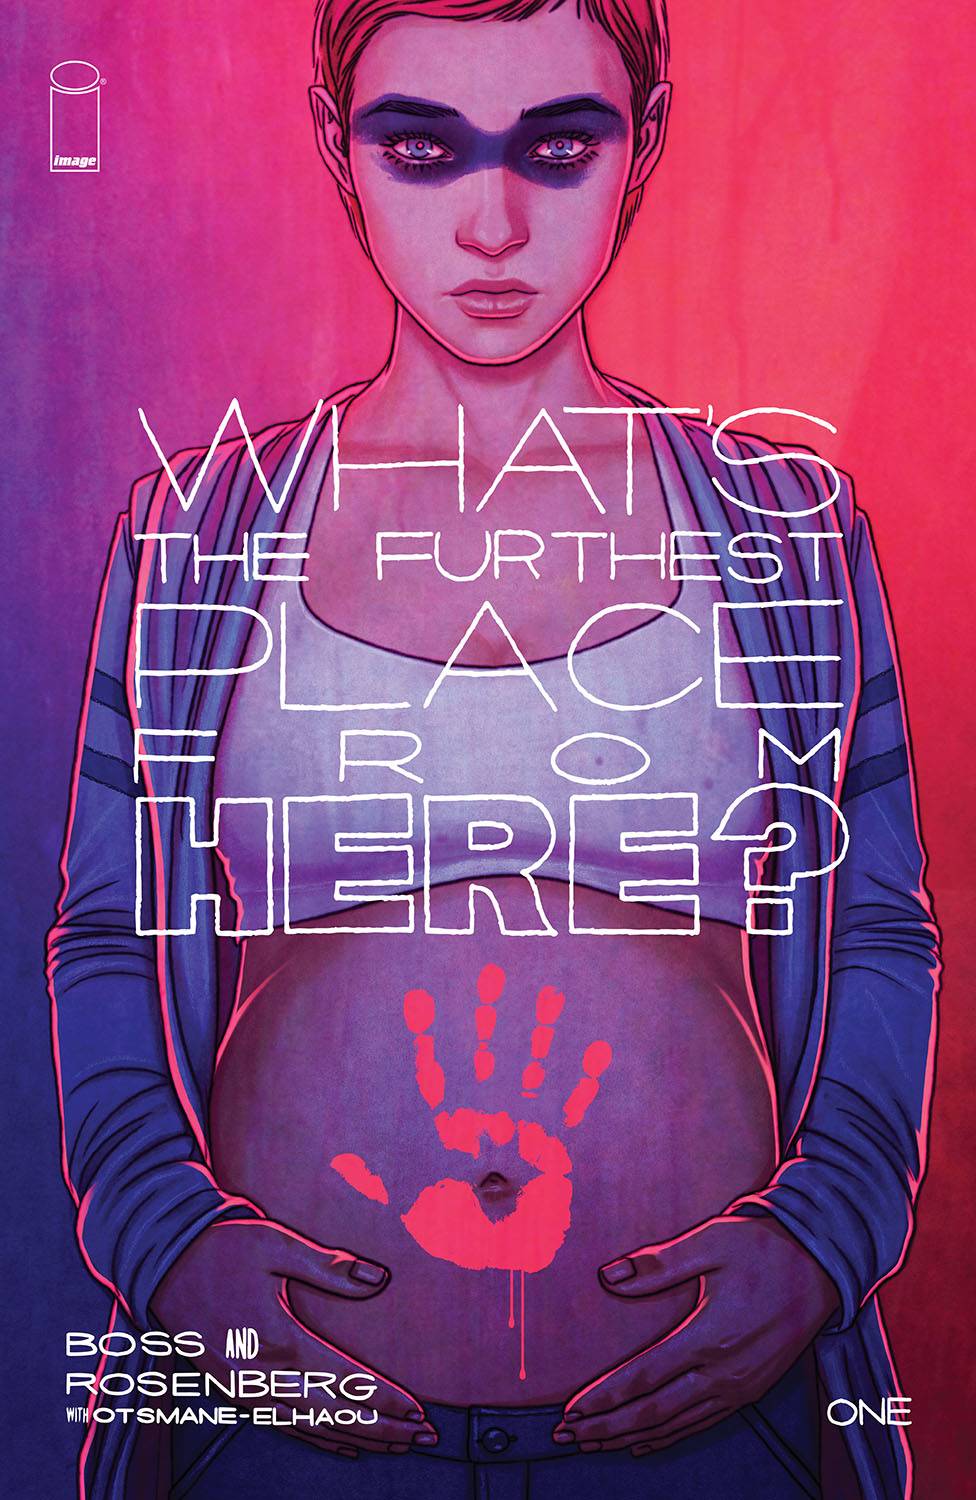 WHAT’S THE FURTHEST PLACE FROM HERE (1/75 Jenny Frison Trade Dress)